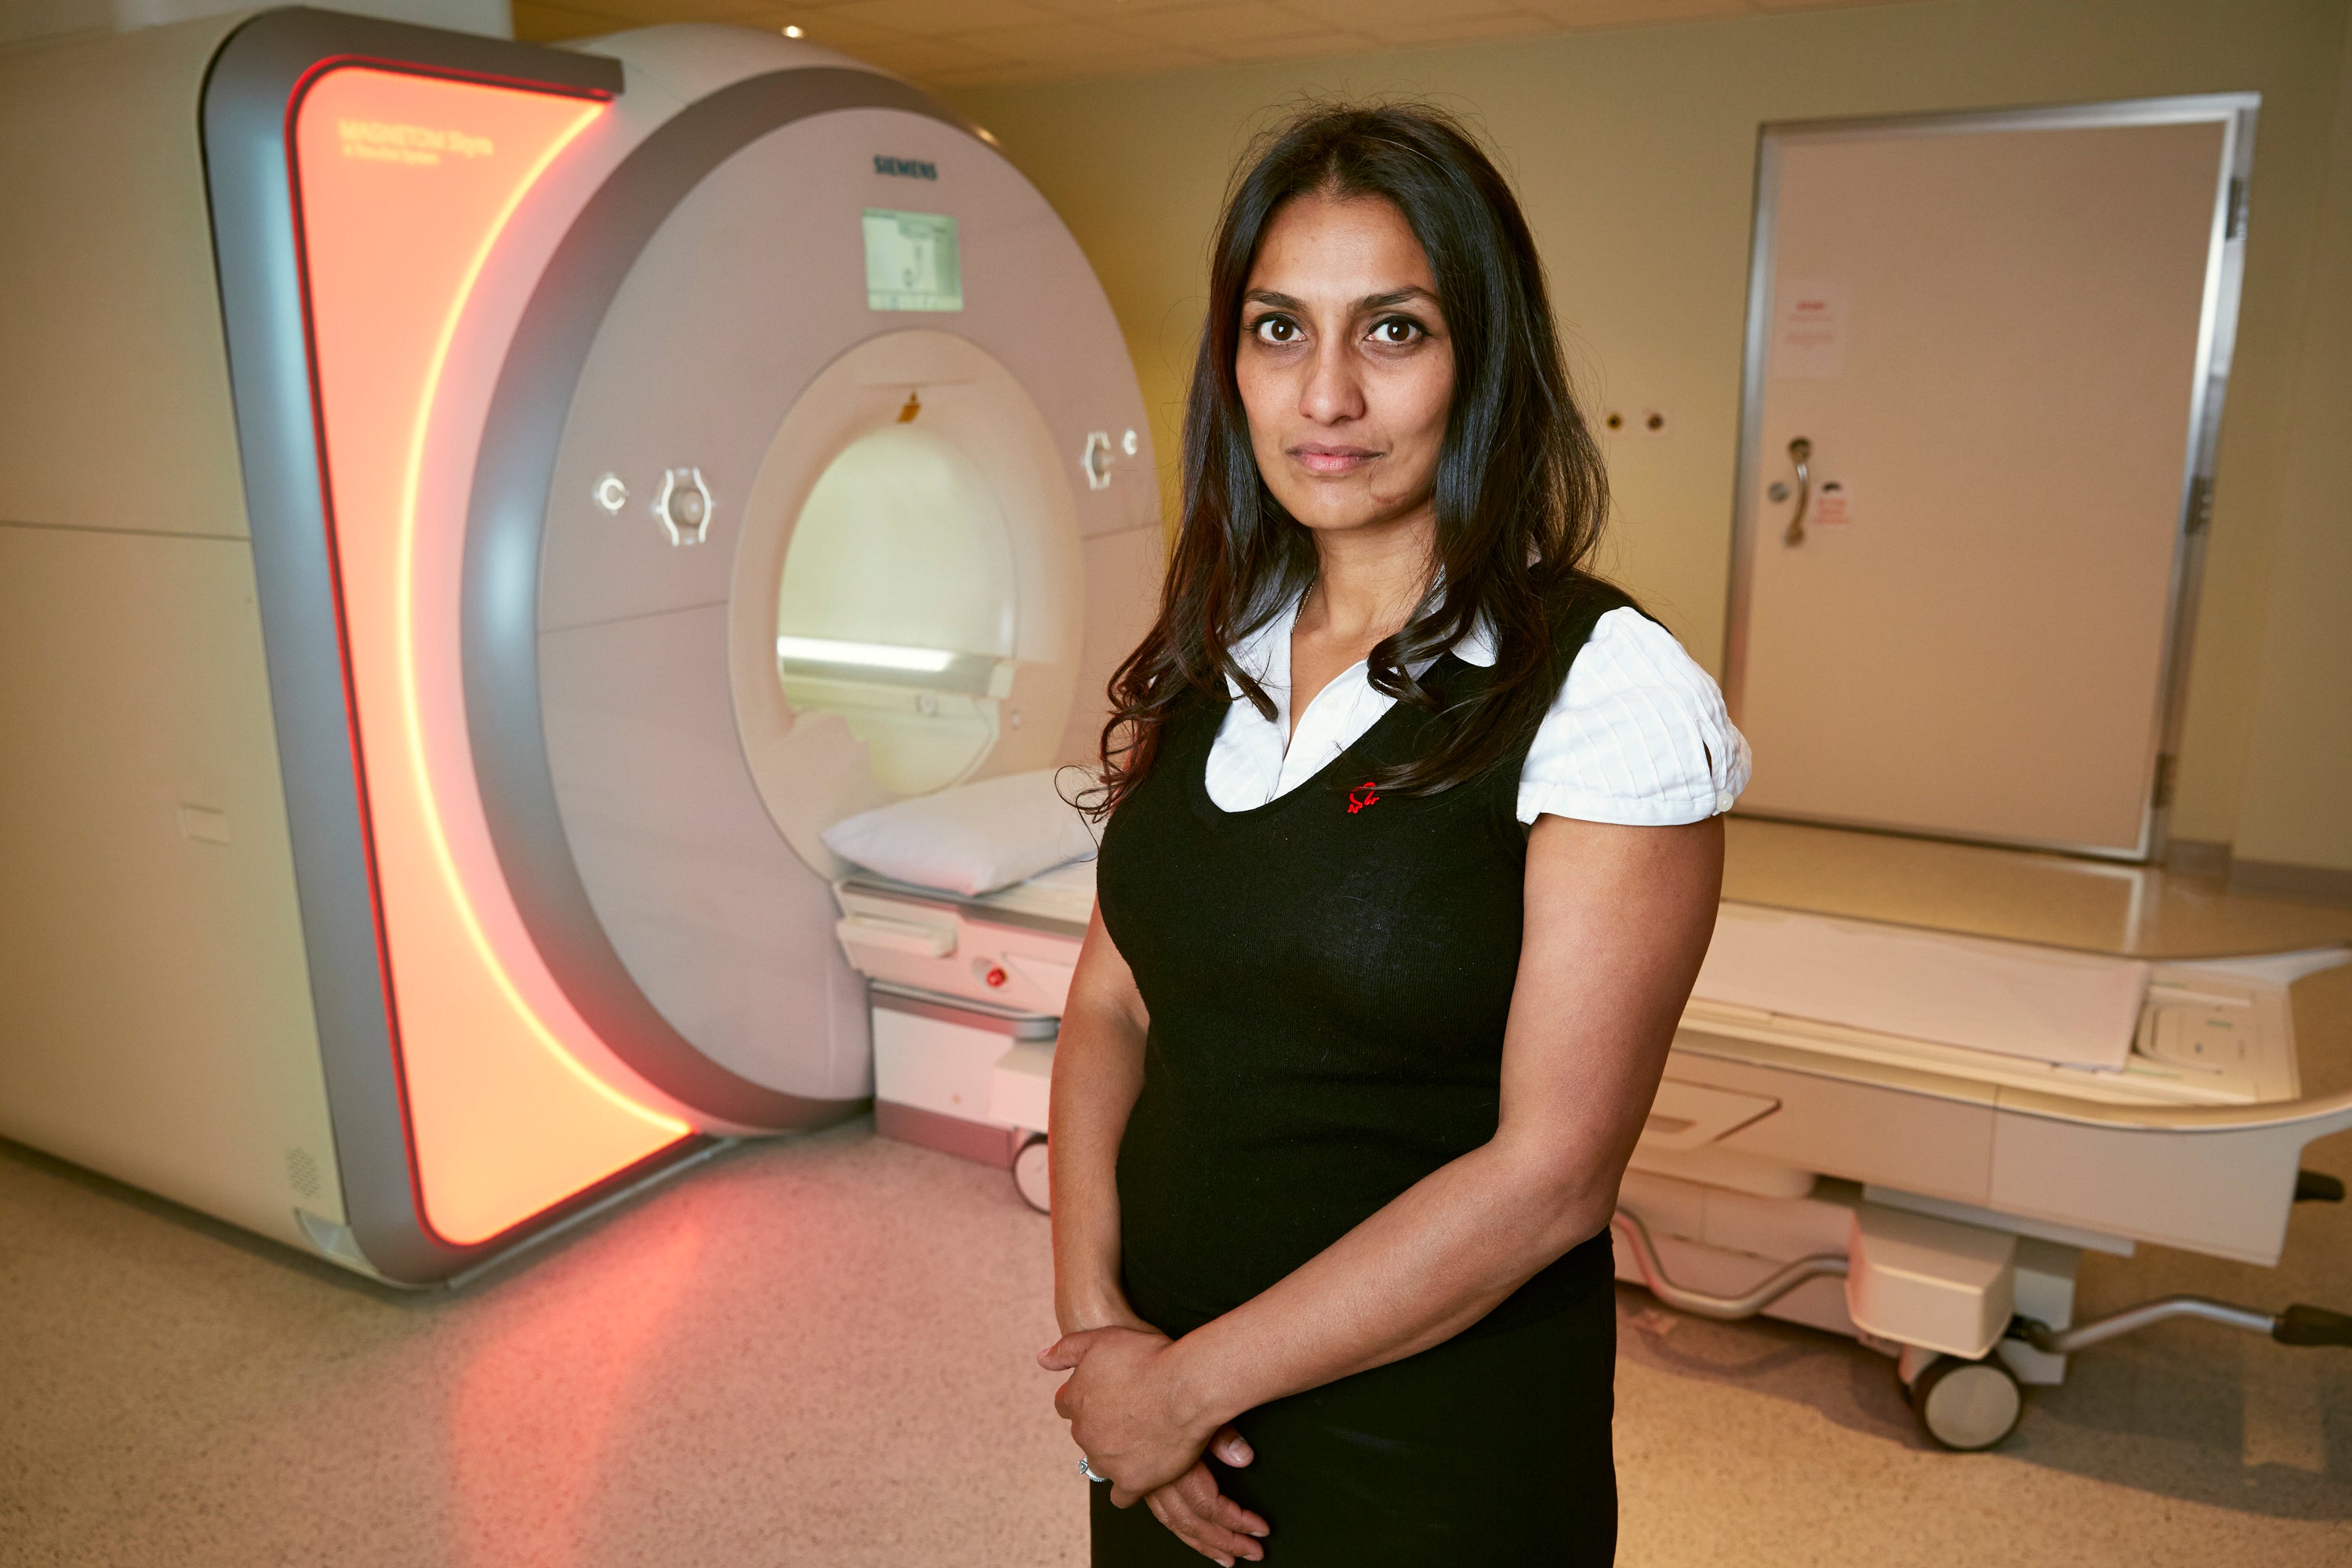 Dr Sonya Babu-Narayan, Associate Medical Director and Consultant Cardiologist for The British Heart Foundation